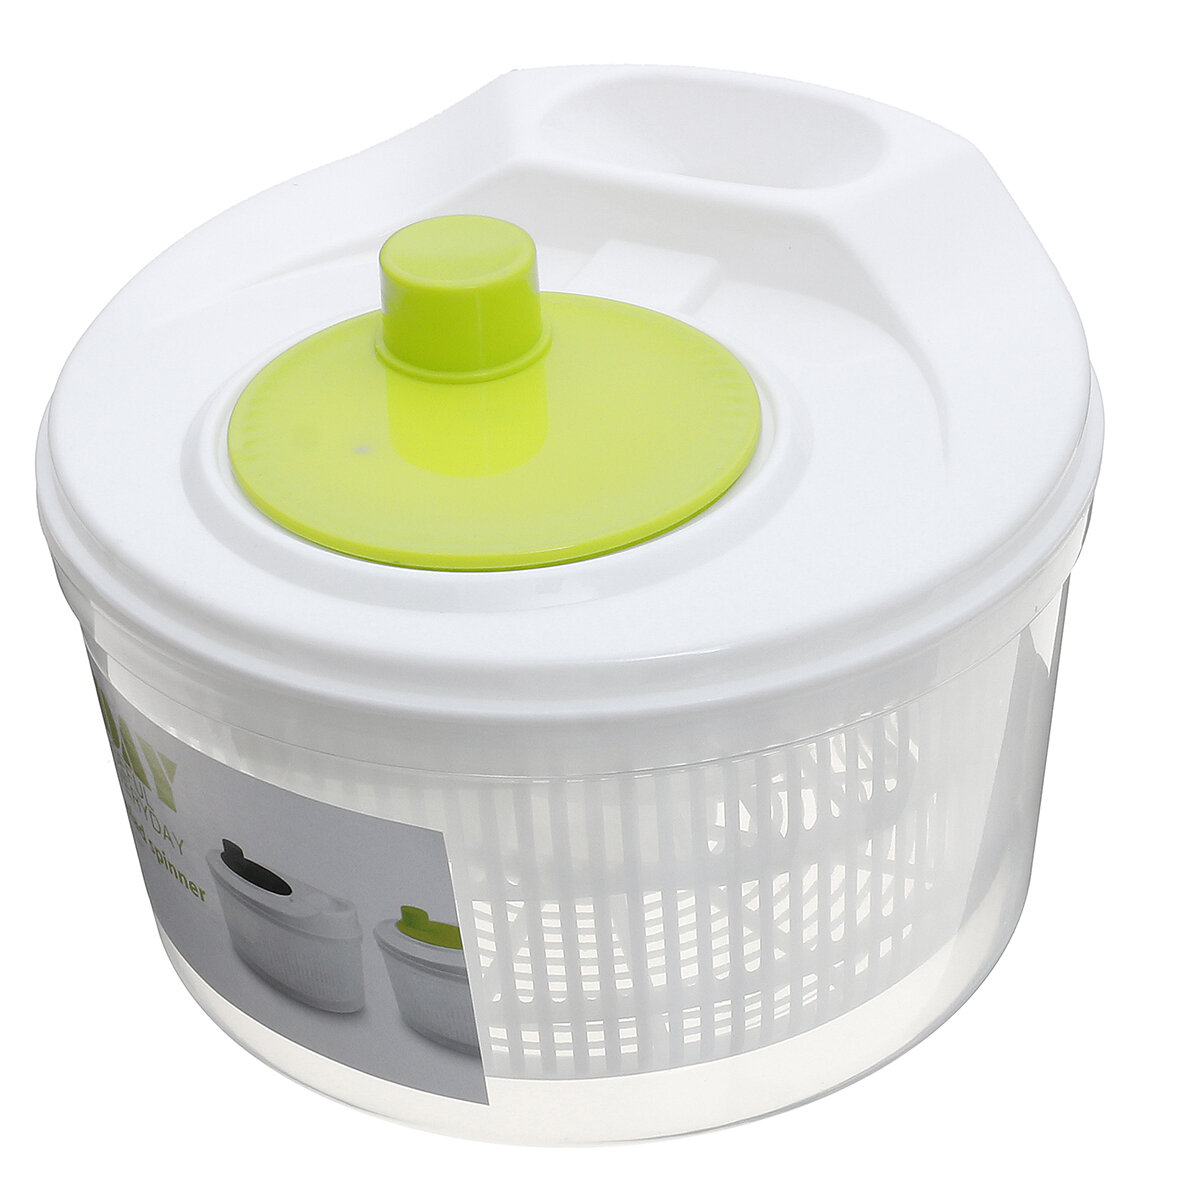 Portable Vegetable Spin Dryer Dehydrator Household Drainer Salad Spinner for Kitchen Drying Tool